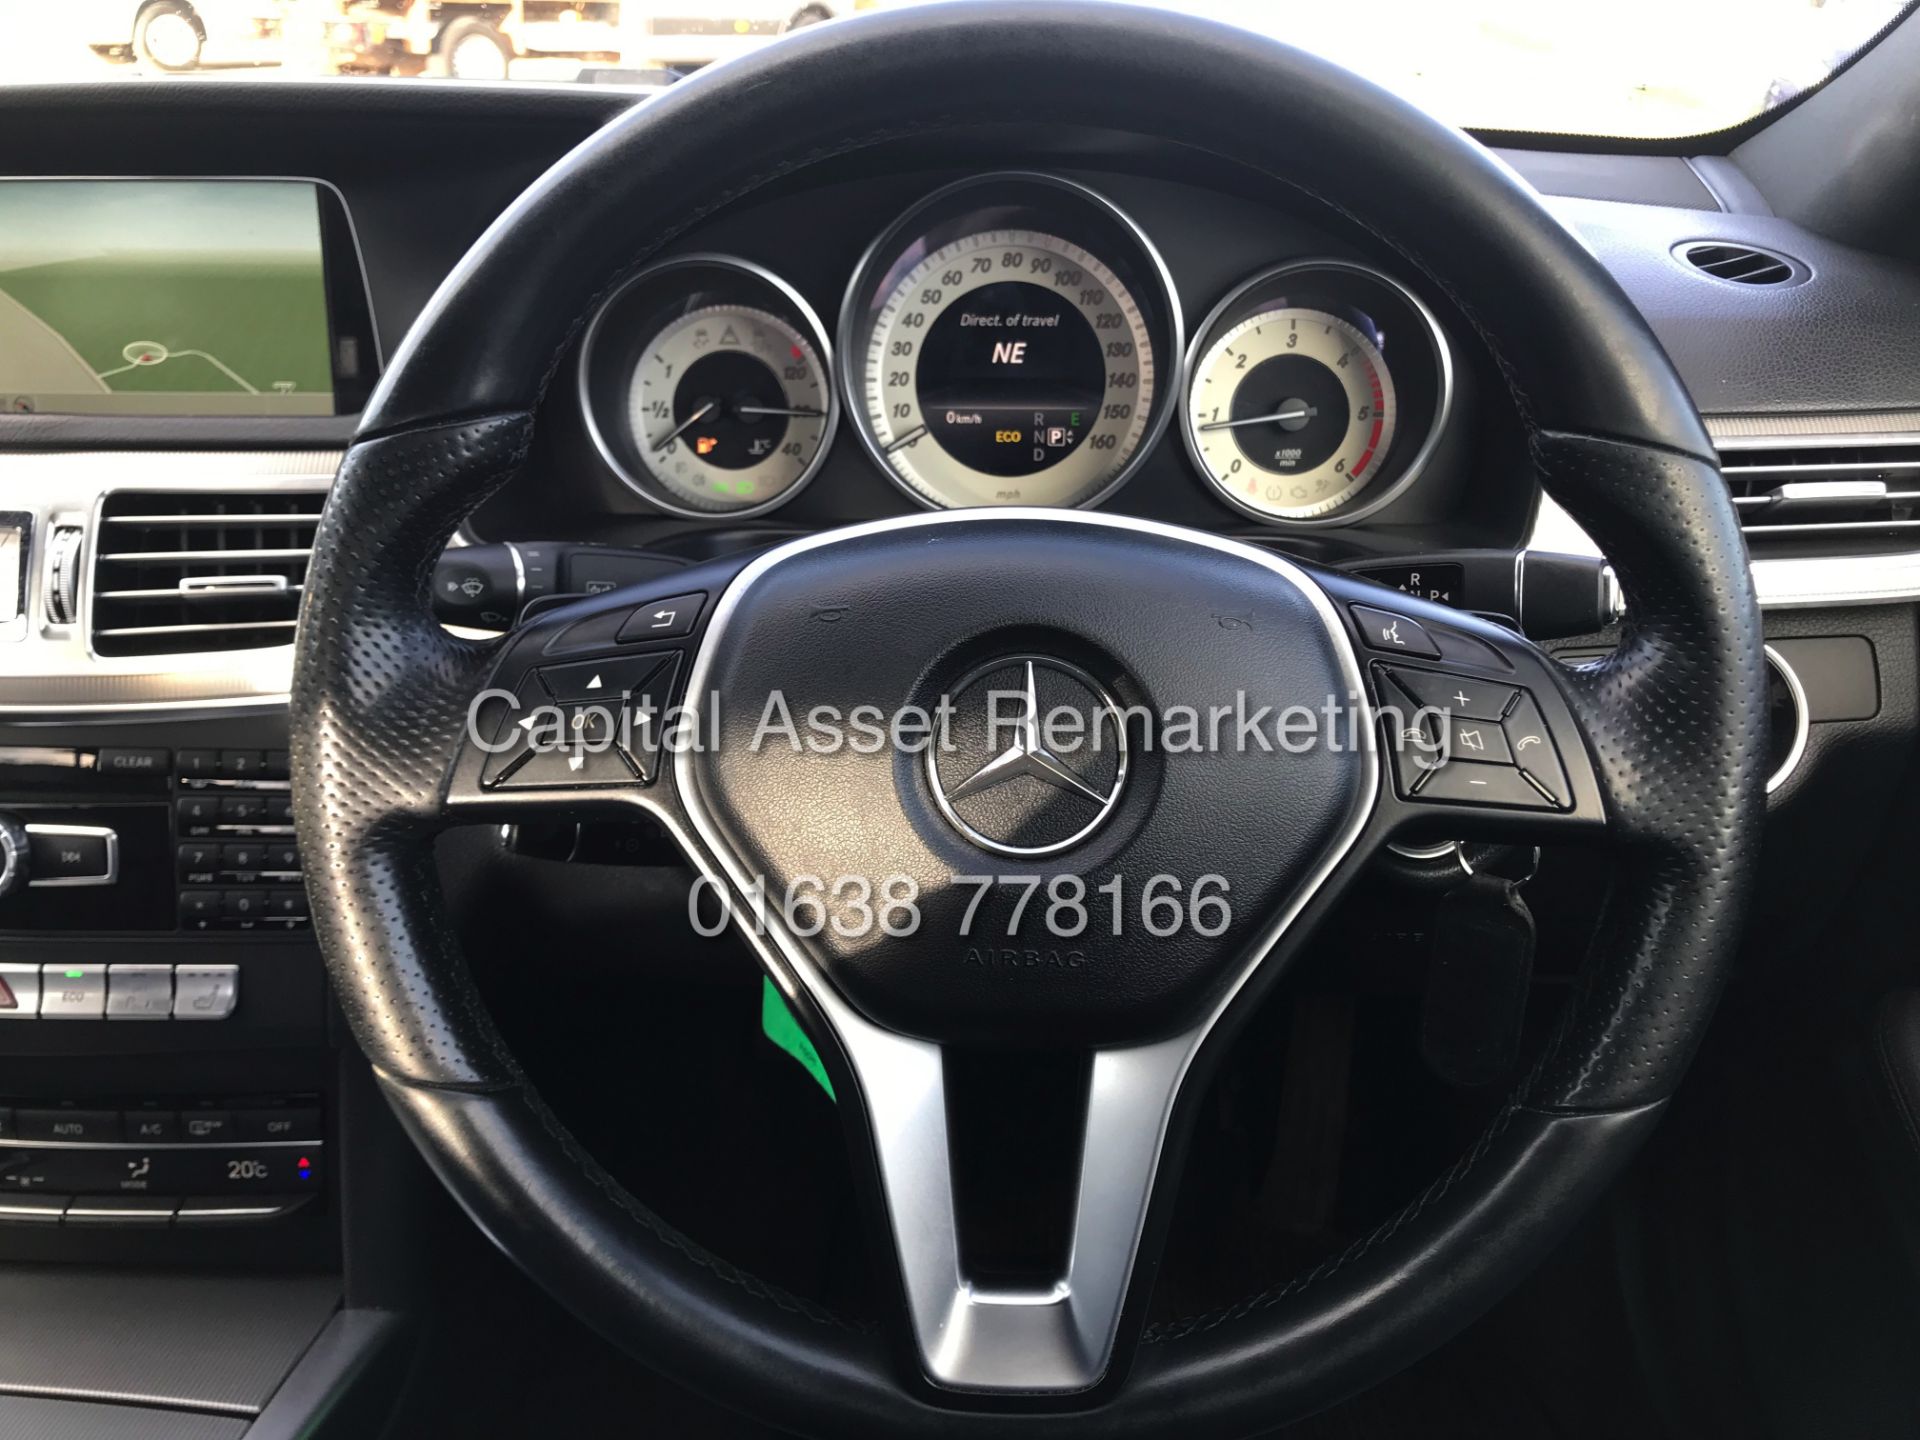 MERCEDES E220d "SPECIAL EQUIPMENT" 7G TRONIC AUTO (2015 MODEL) 1 OWNER - SAT NAV - LEATHER - Image 15 of 26